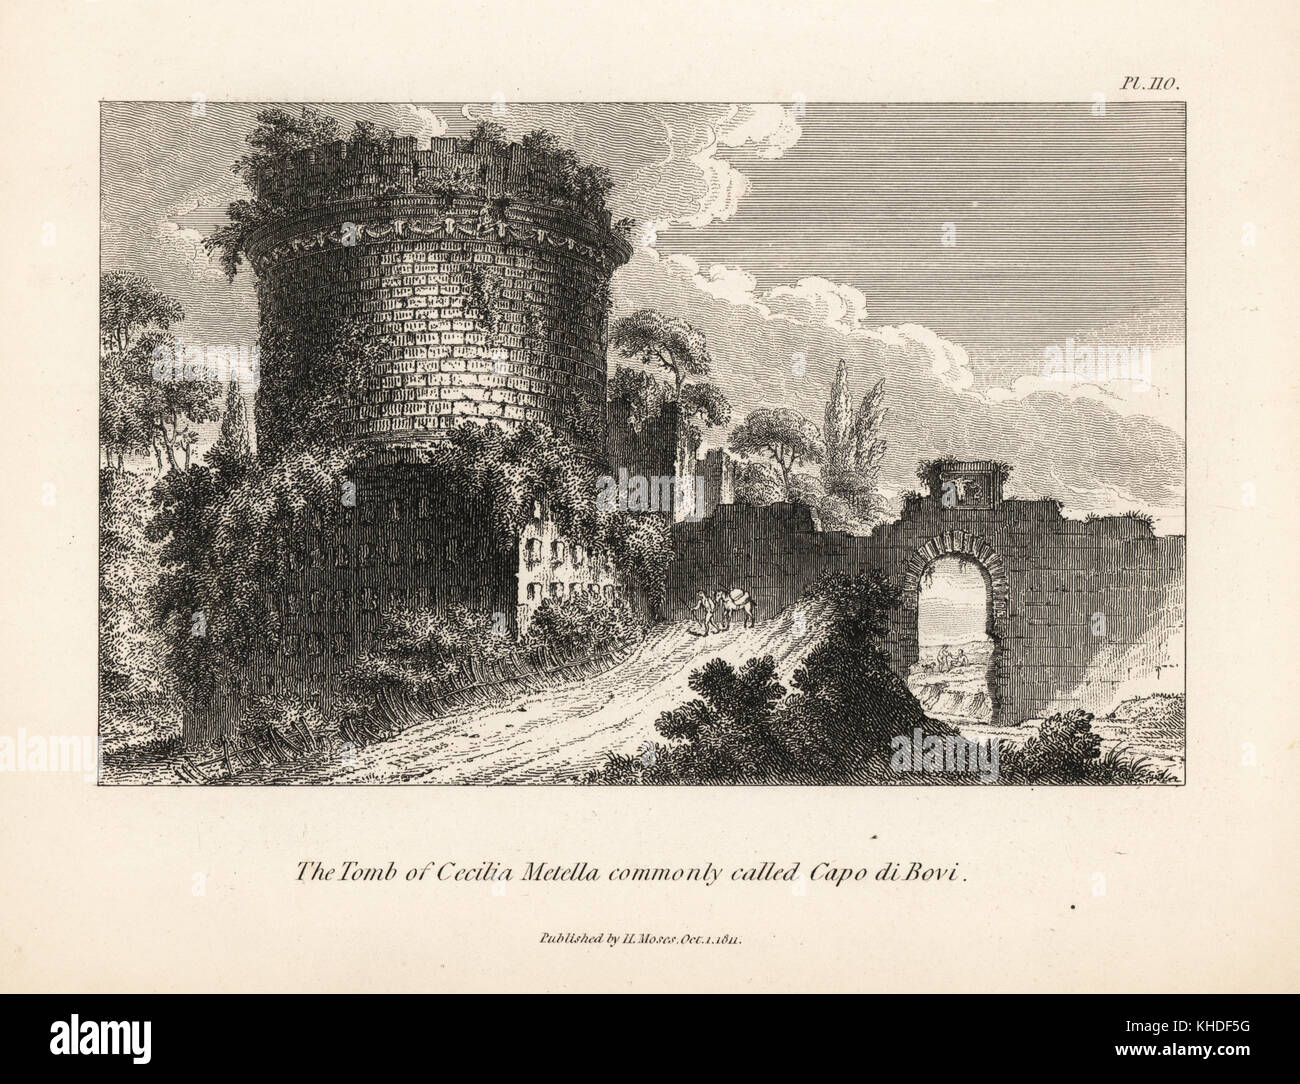 The Tomb of Cecilia Metella or the Capo di Bovi, Via Appia, outside Rome. Copperplate engraving by Henry Moses from A Collection of Antique Vases, Altars, etc., London, 1814. Stock Photo